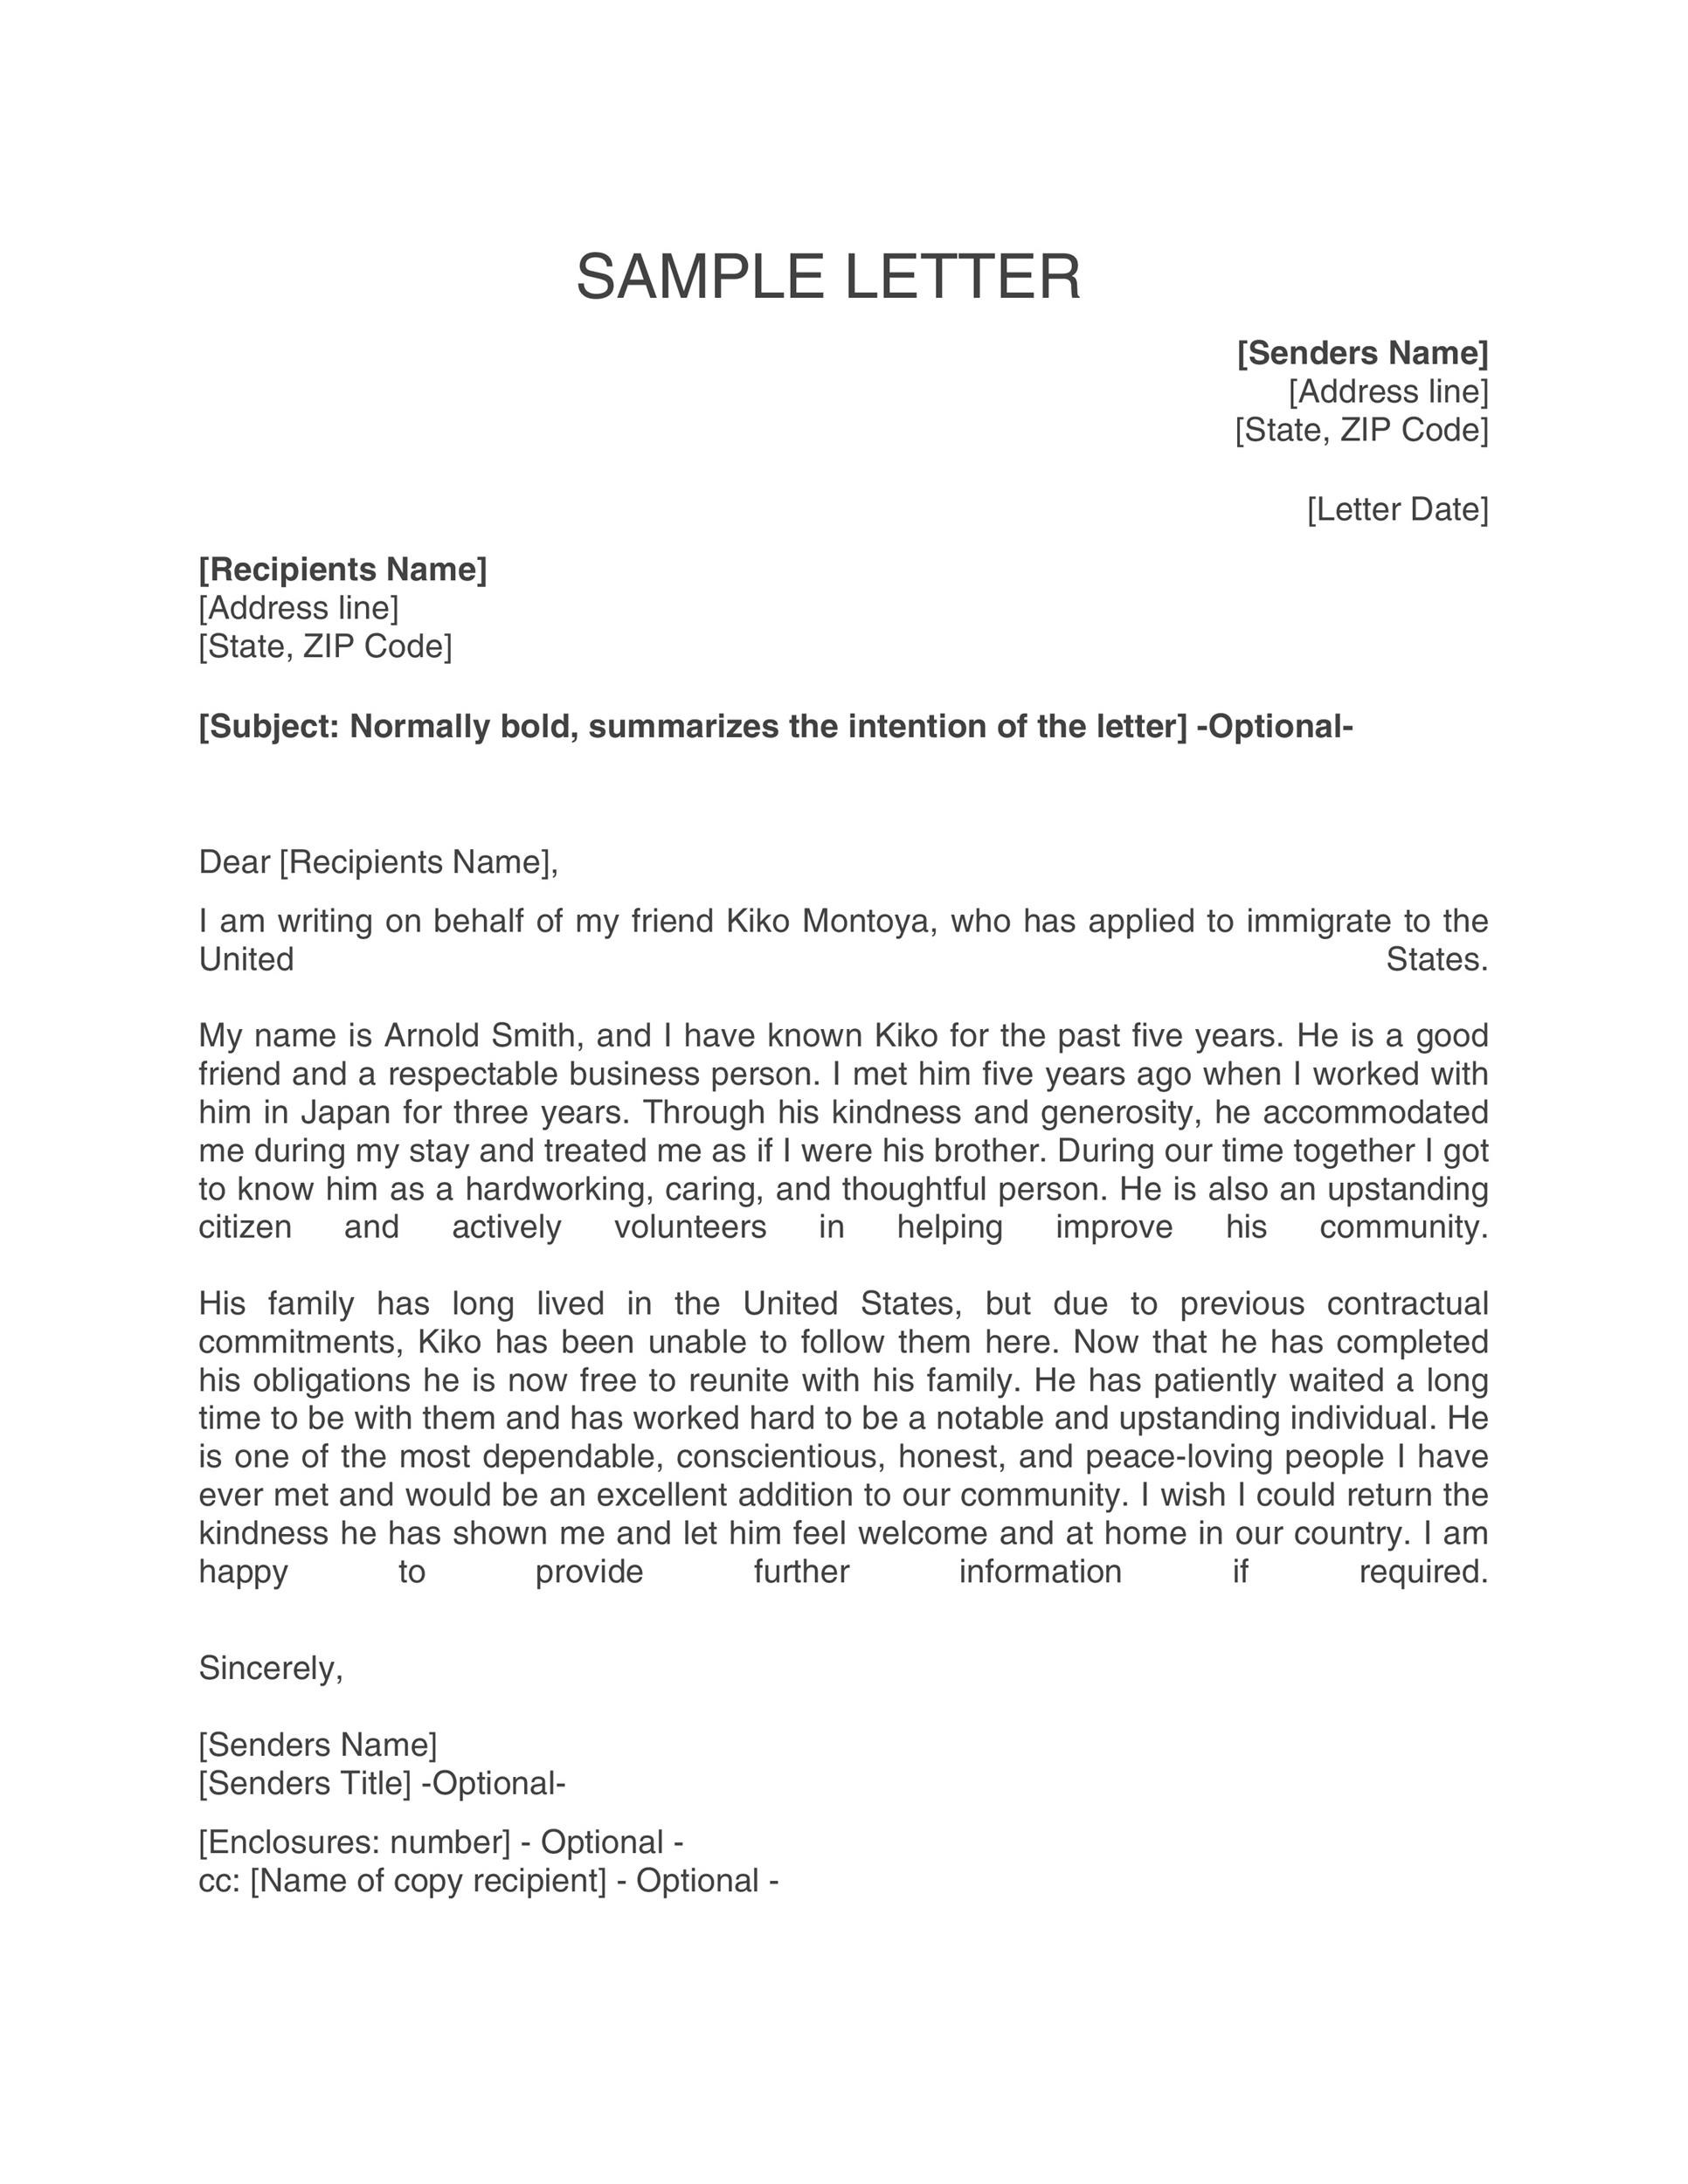 A Letter To Immigration Officer Sample from templatelab.com